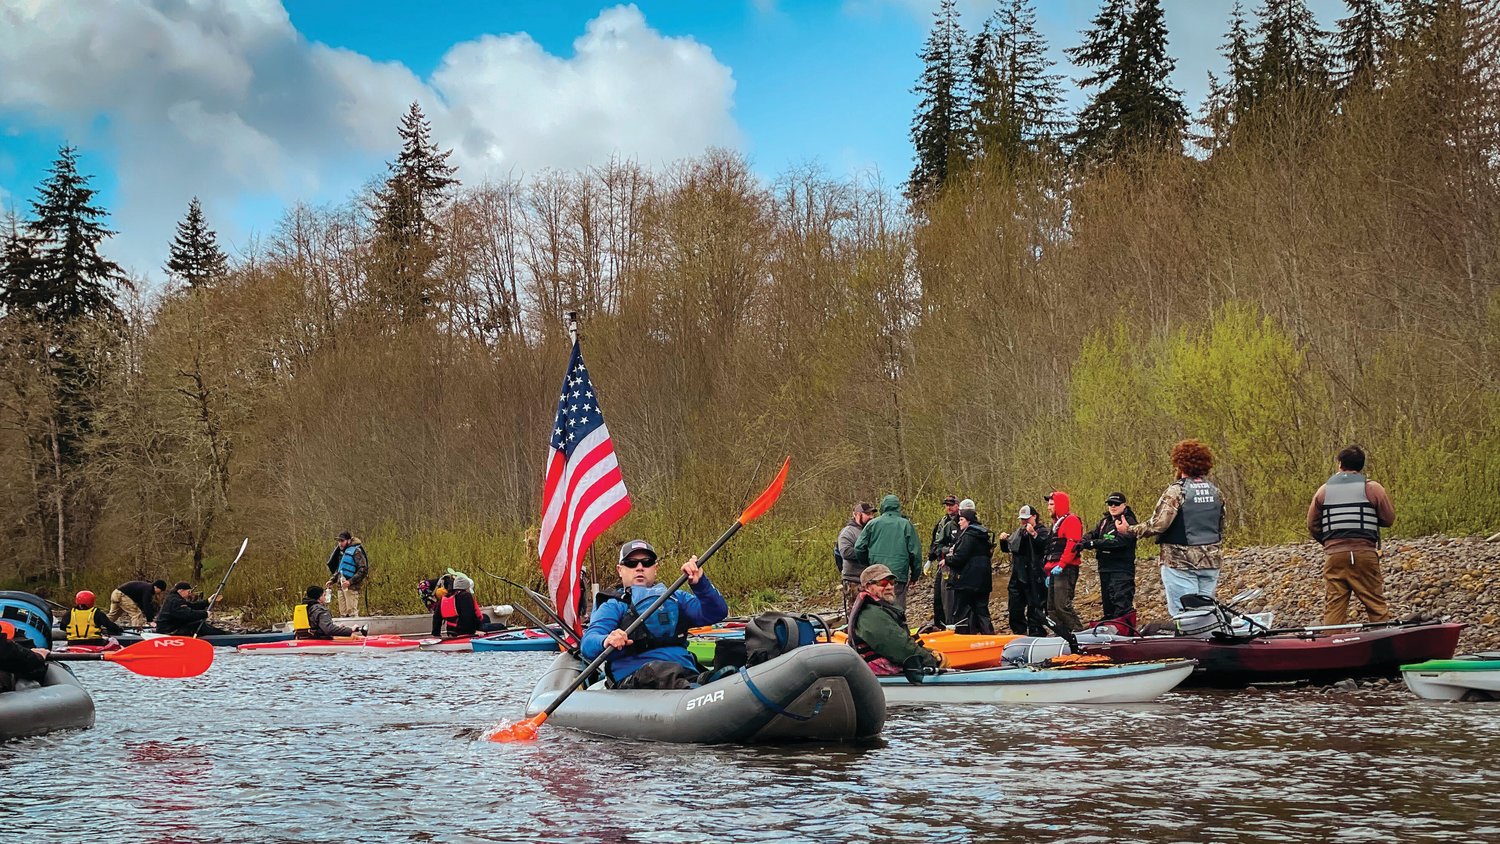 River runners shove off onto the Chehalis River on Saturday.